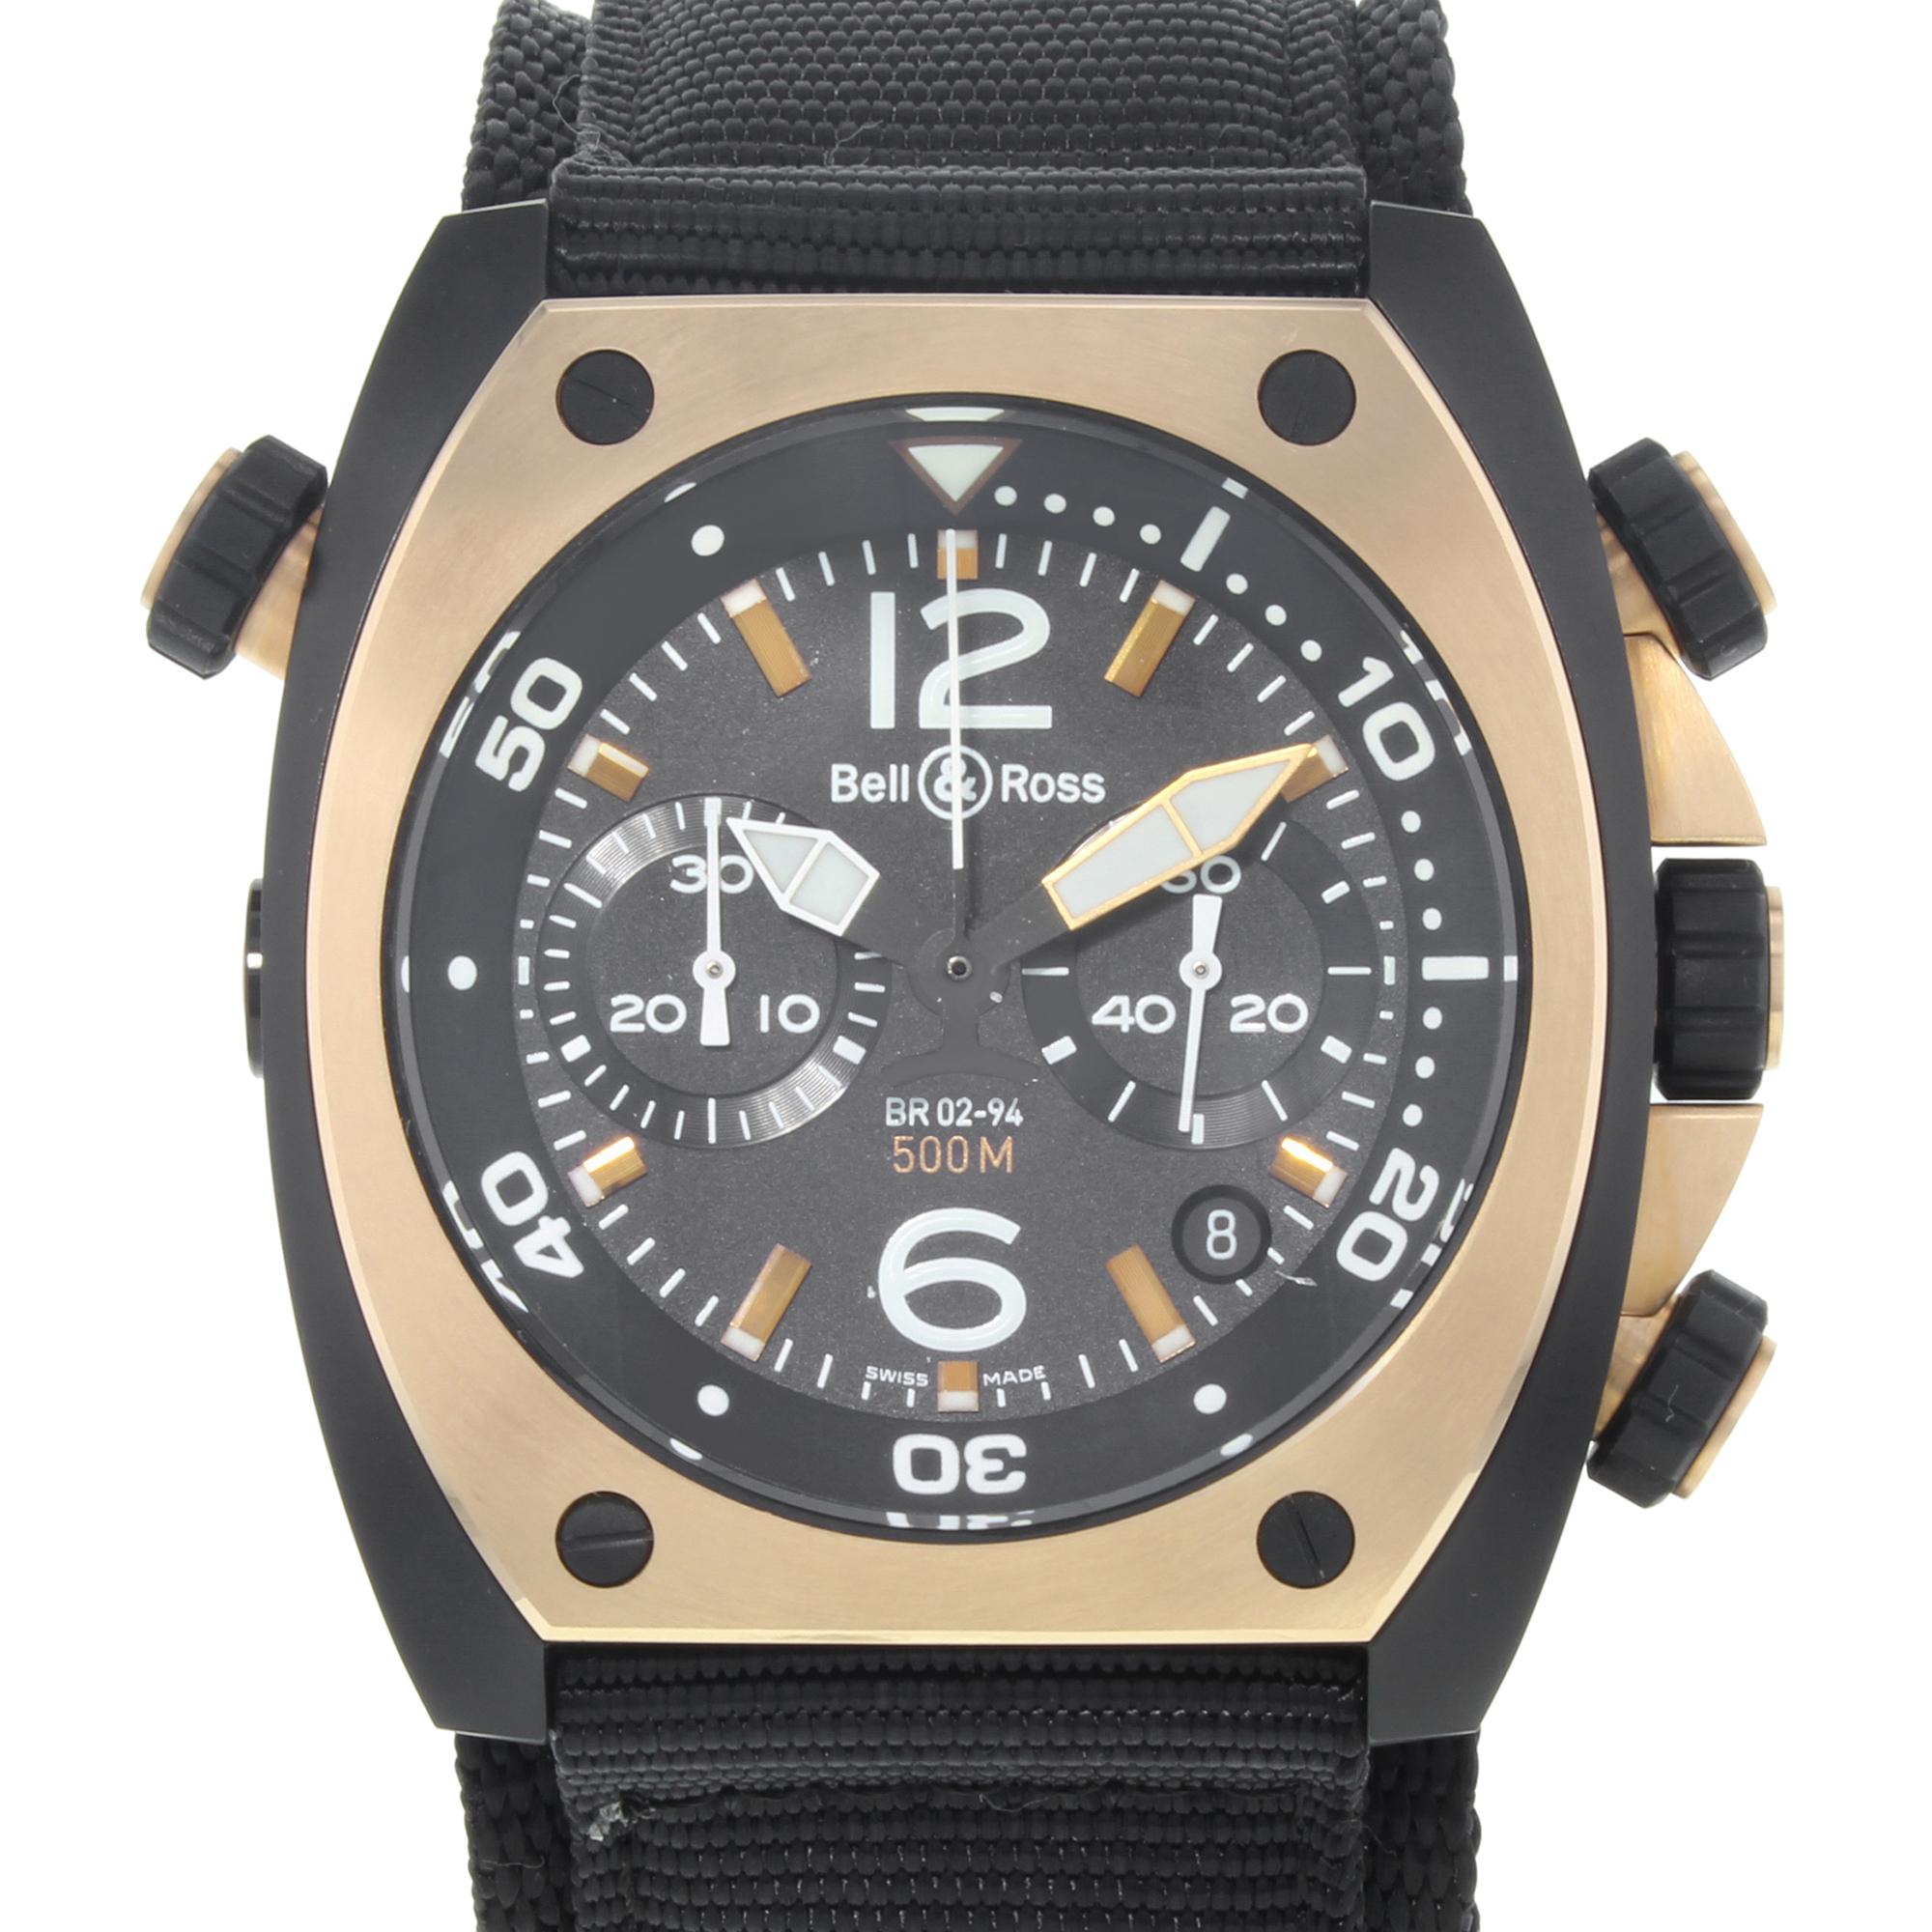 This display model Bell & Ross Marine  BR02-CHR-BICOLO is a beautiful men's timepiece that is powered by mechanical (automatic) movement which is cased in a stainless steel case. It has a tonneau shape face, chronograph, date indicator, small